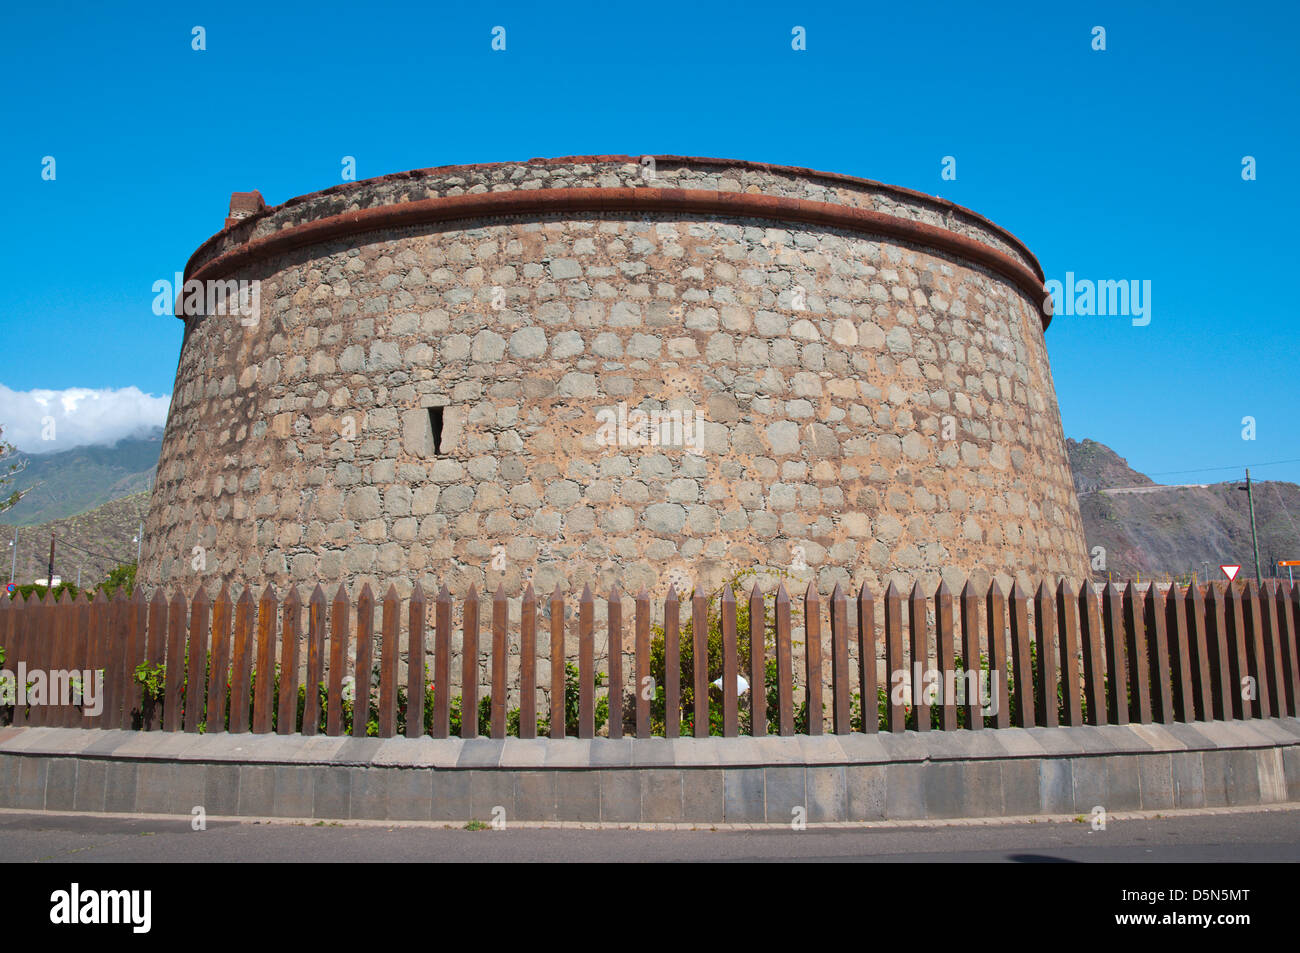 Defensive fortress stronghold San Andres town Tenerife island the Canary Islands Spain Europe Stock Photo